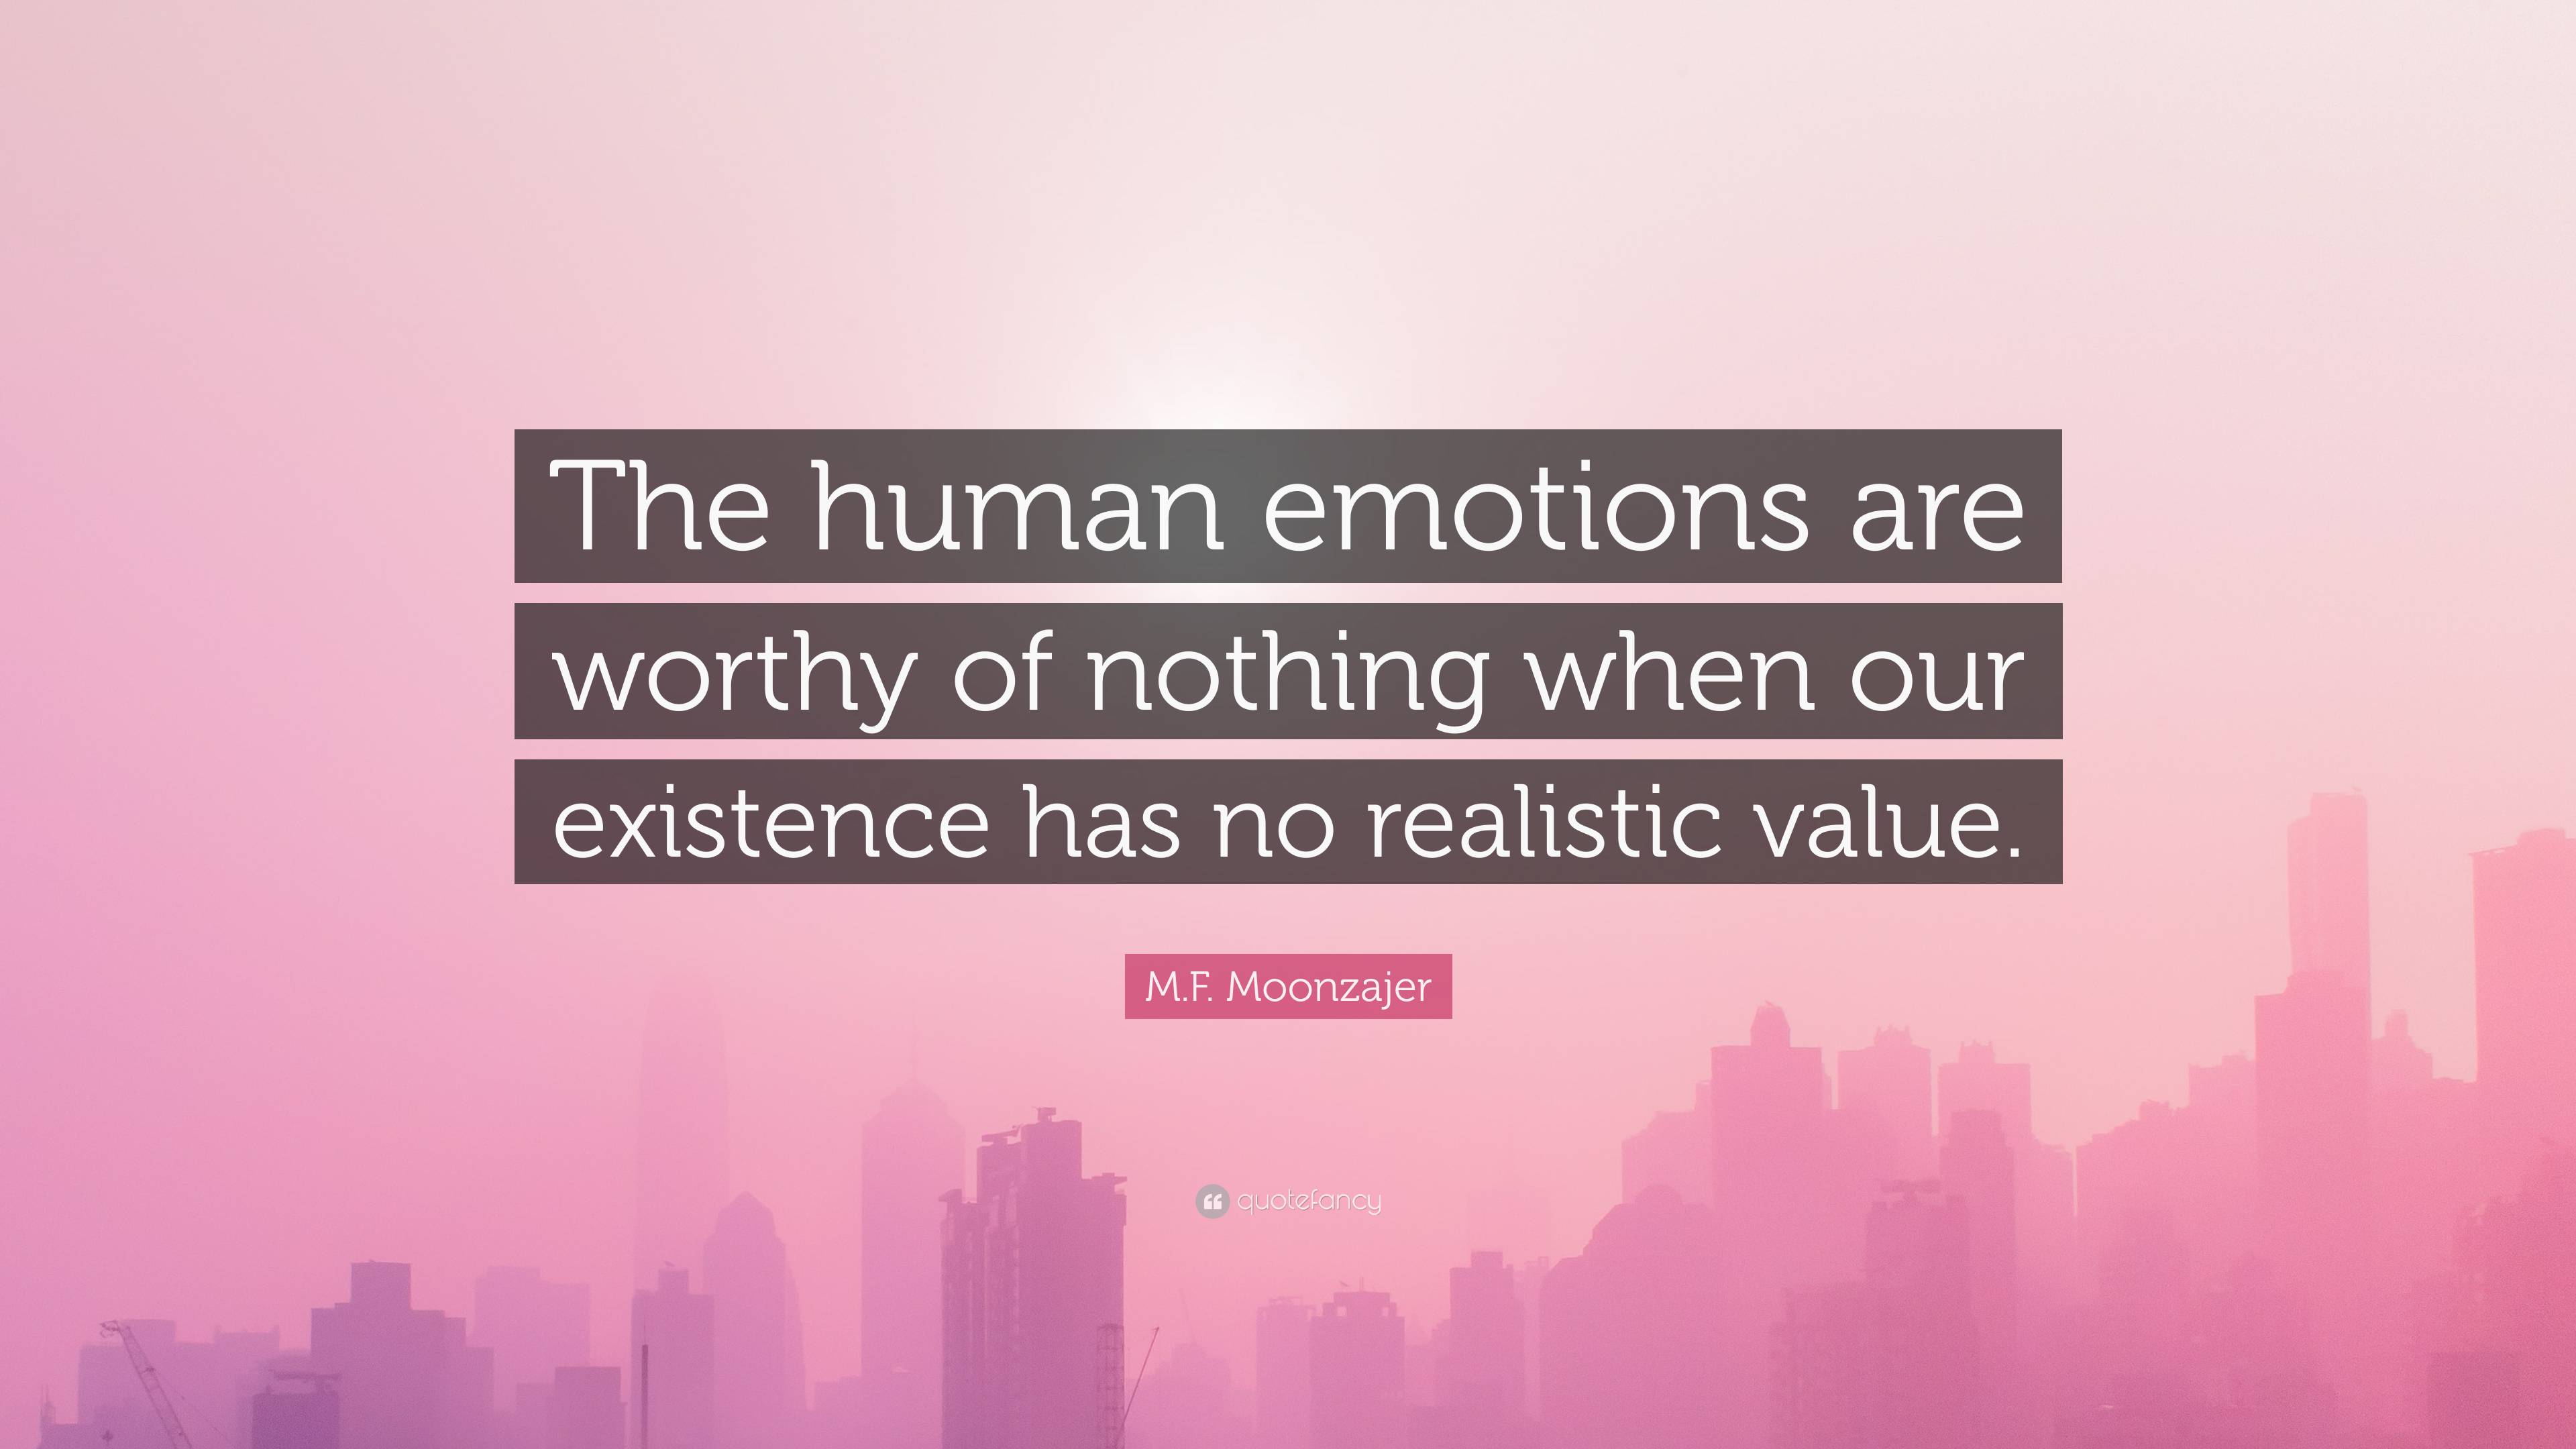 M.F. Moonzajer Quote: “The human emotions are worthy of nothing when ...